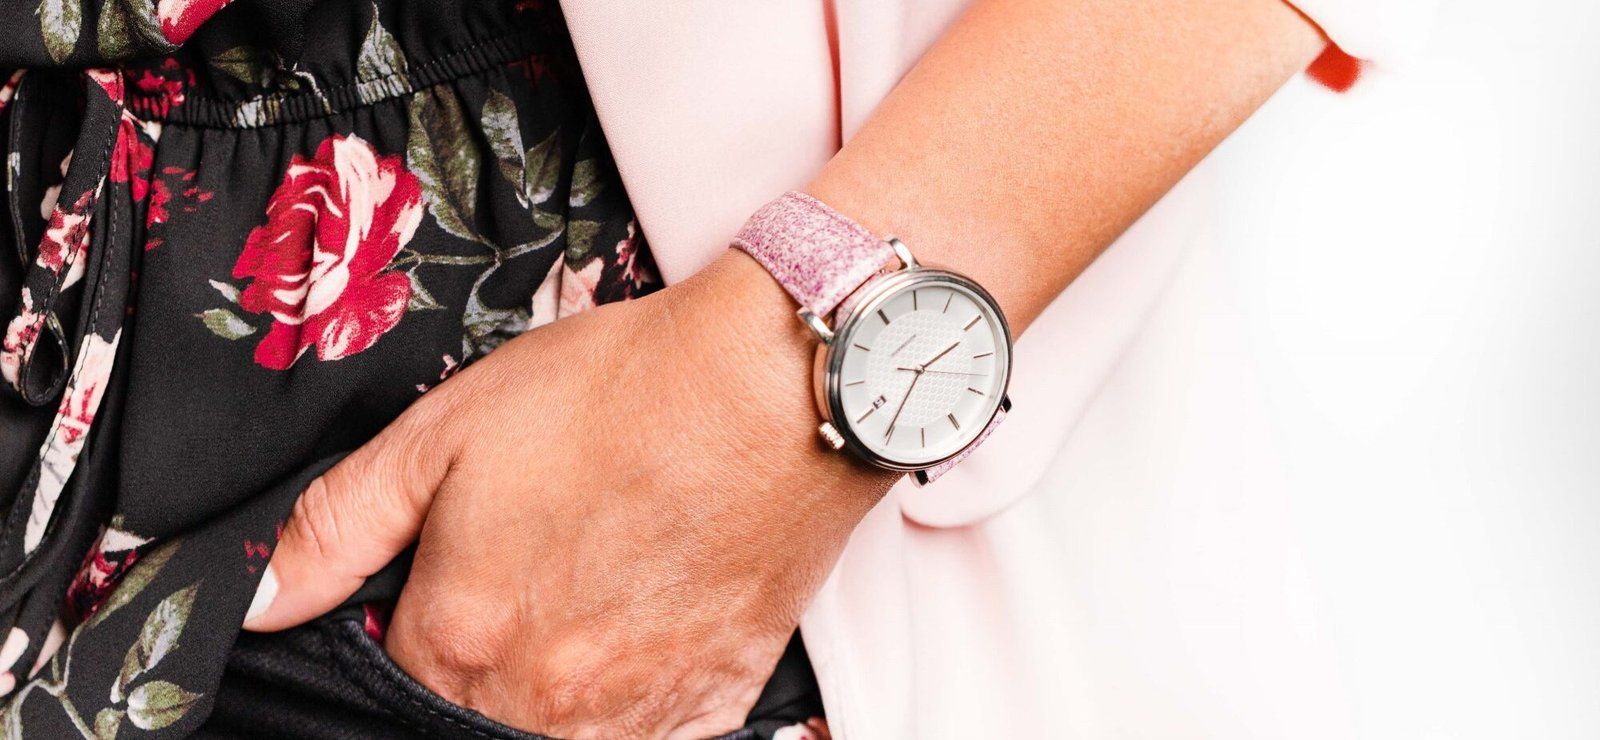 ROSE is a stunning addition to both classic and smart timepieces.